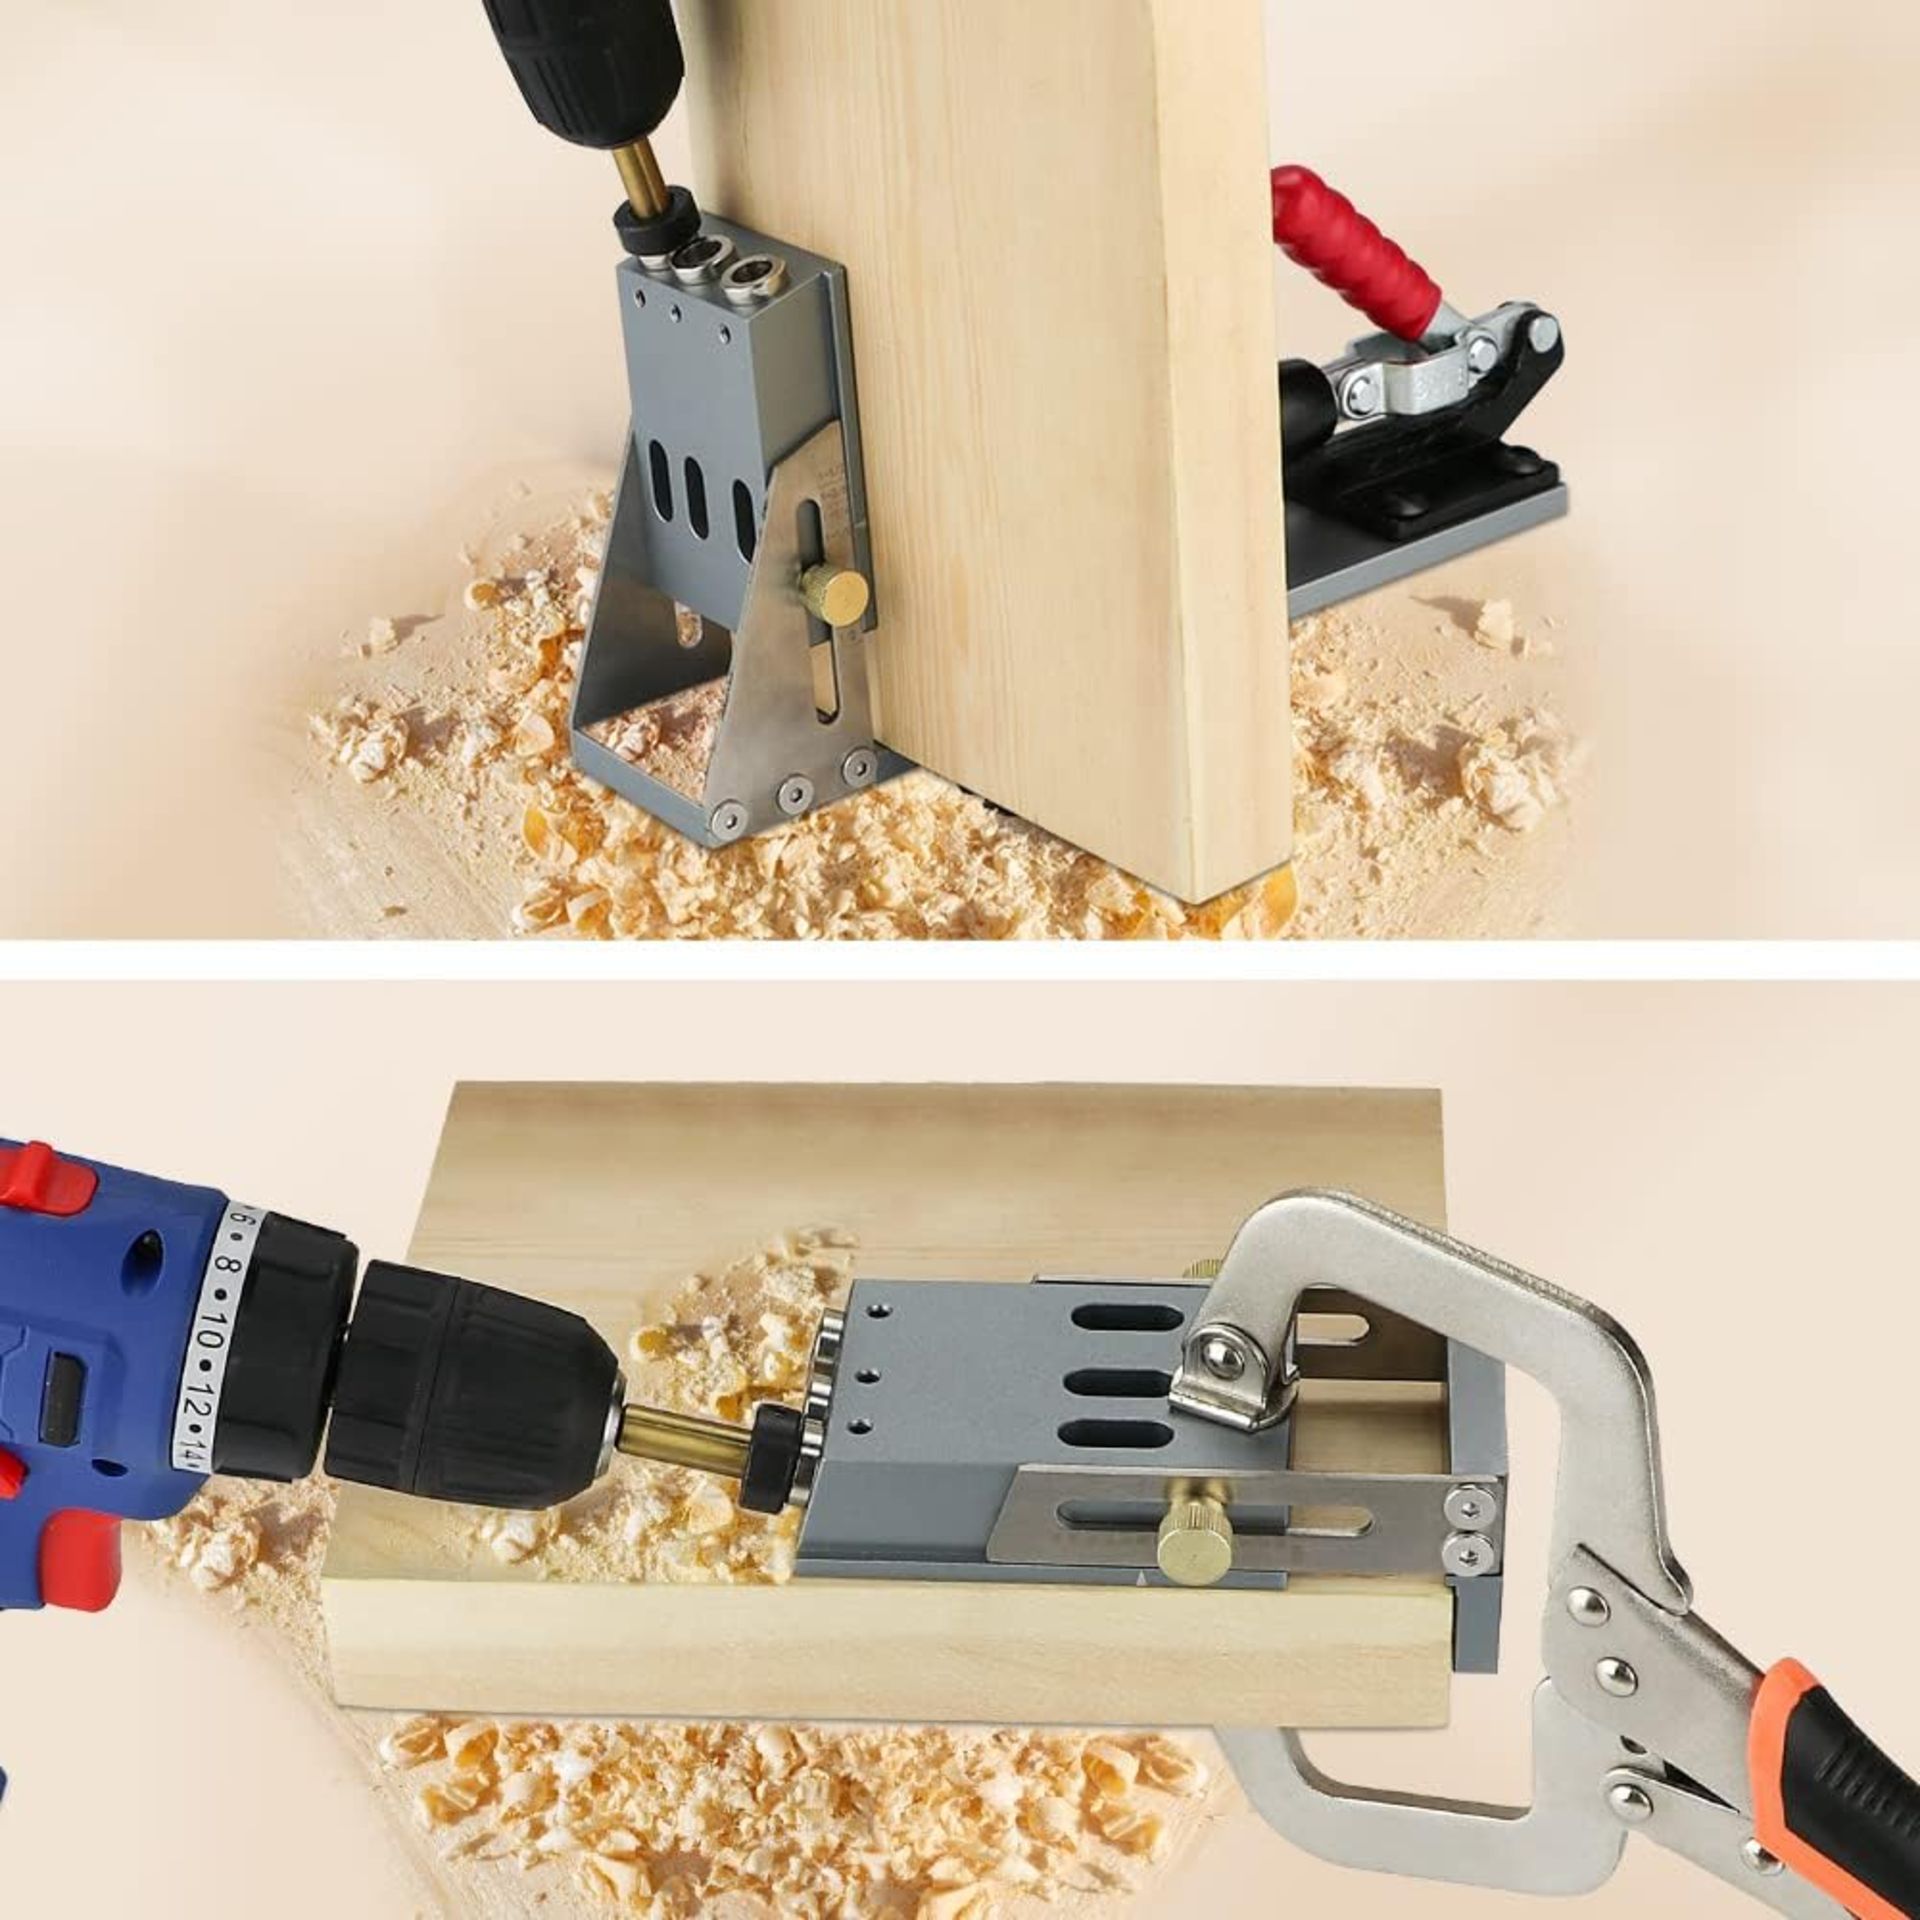 RRP £48.99 Pocket Hole Jig, Upgrade All-Metal Joinery Pocket Hole Screw Jig Drill Guide System